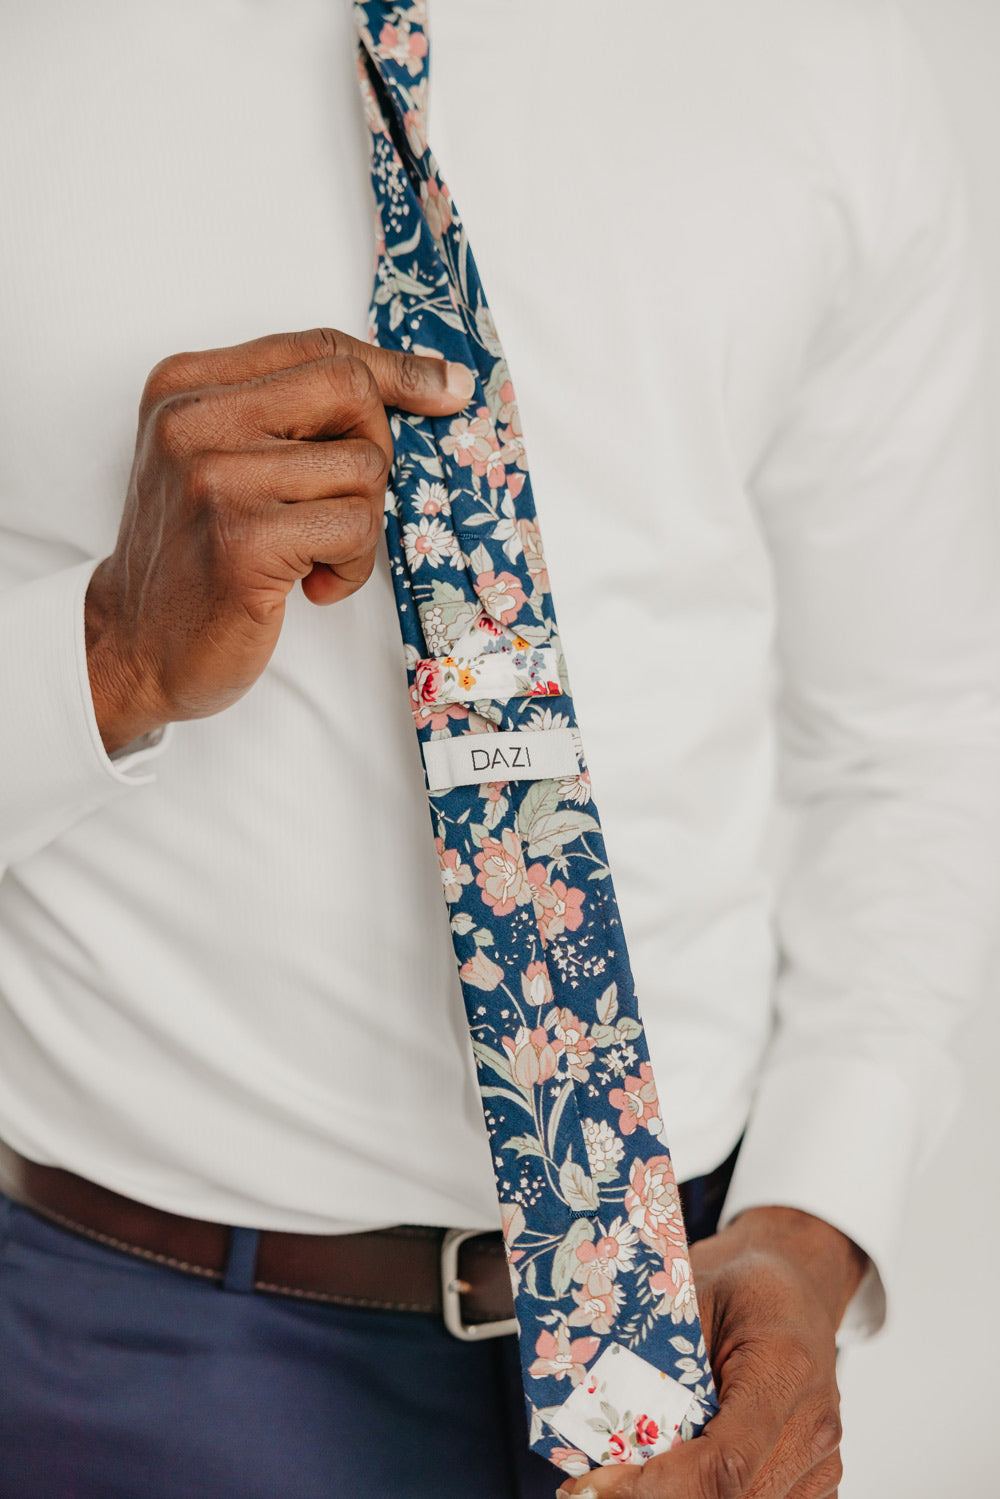 Lotus tie worn with a white shirt, brown belt and blue pants.